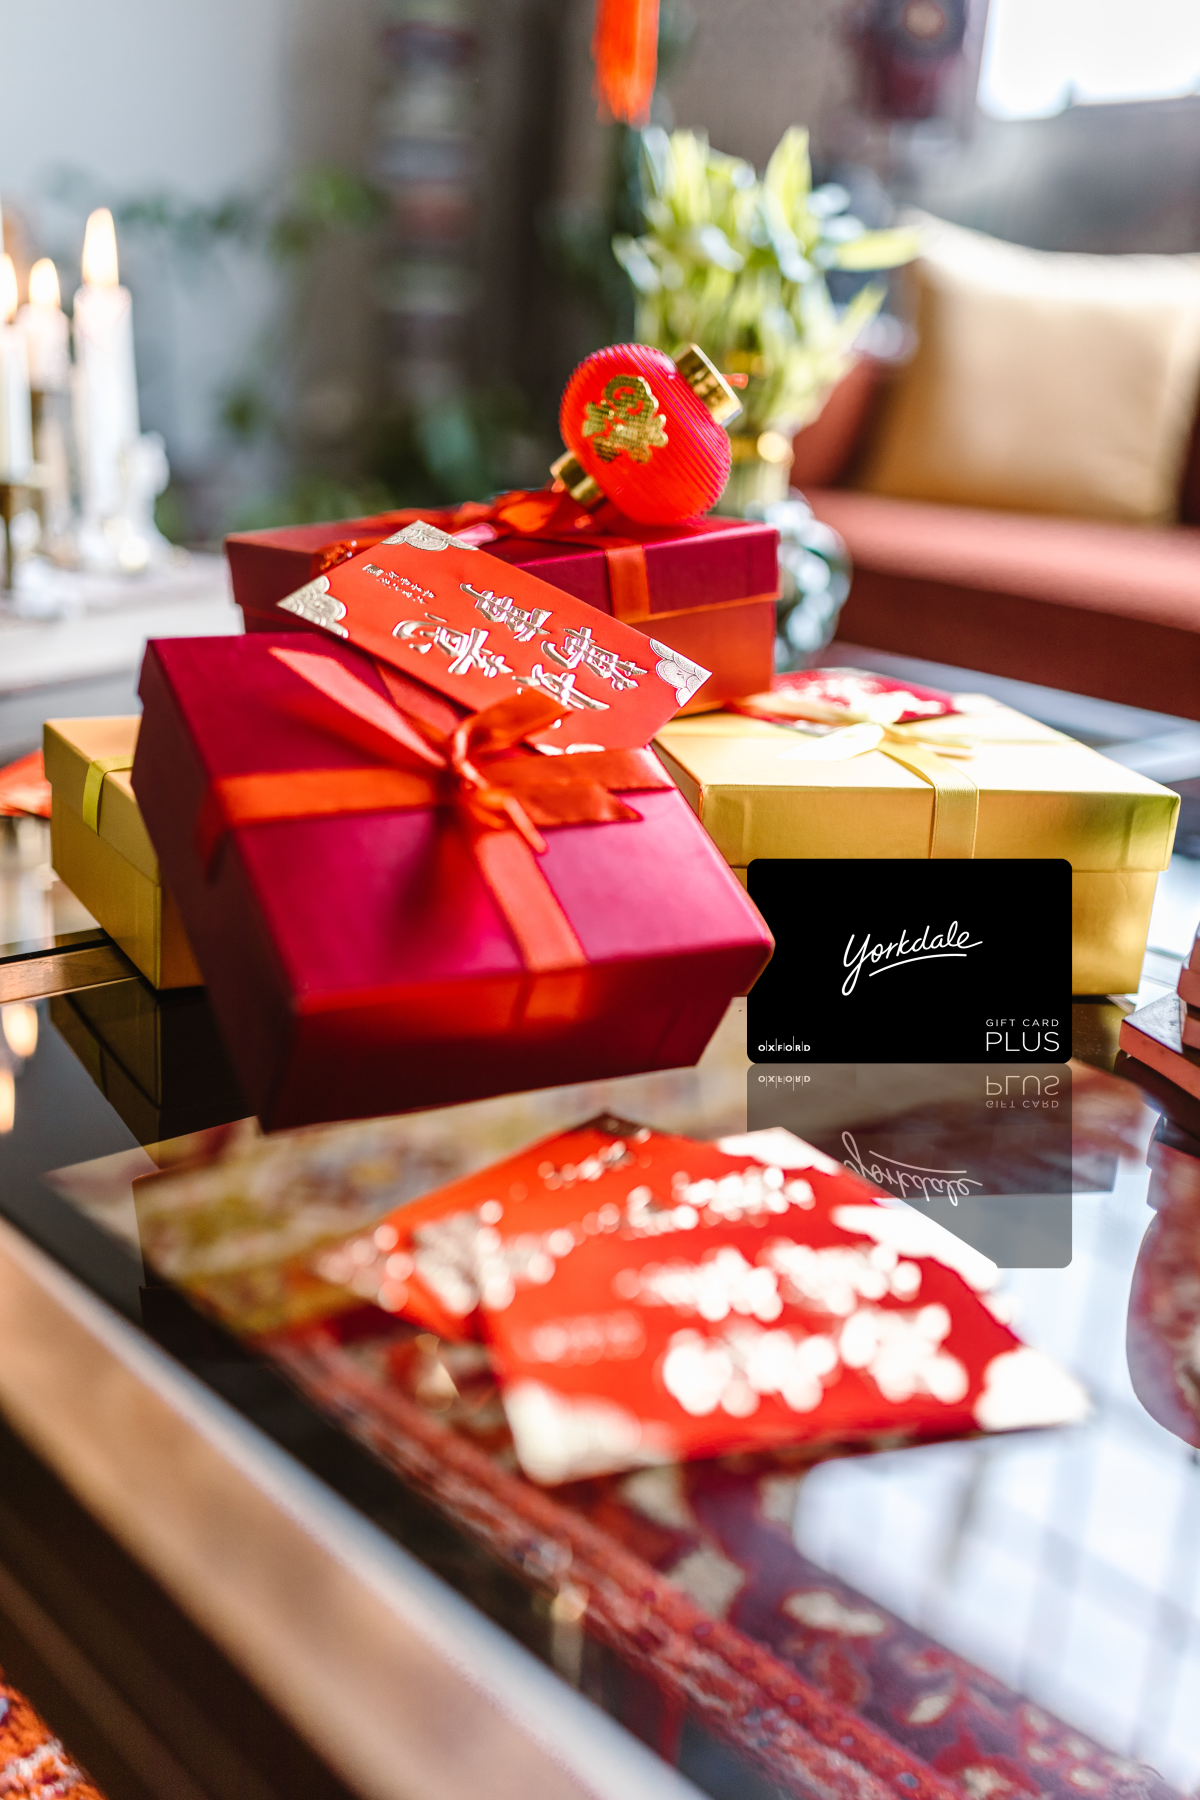 promotional image of a yorkdale gift card for lunar new year